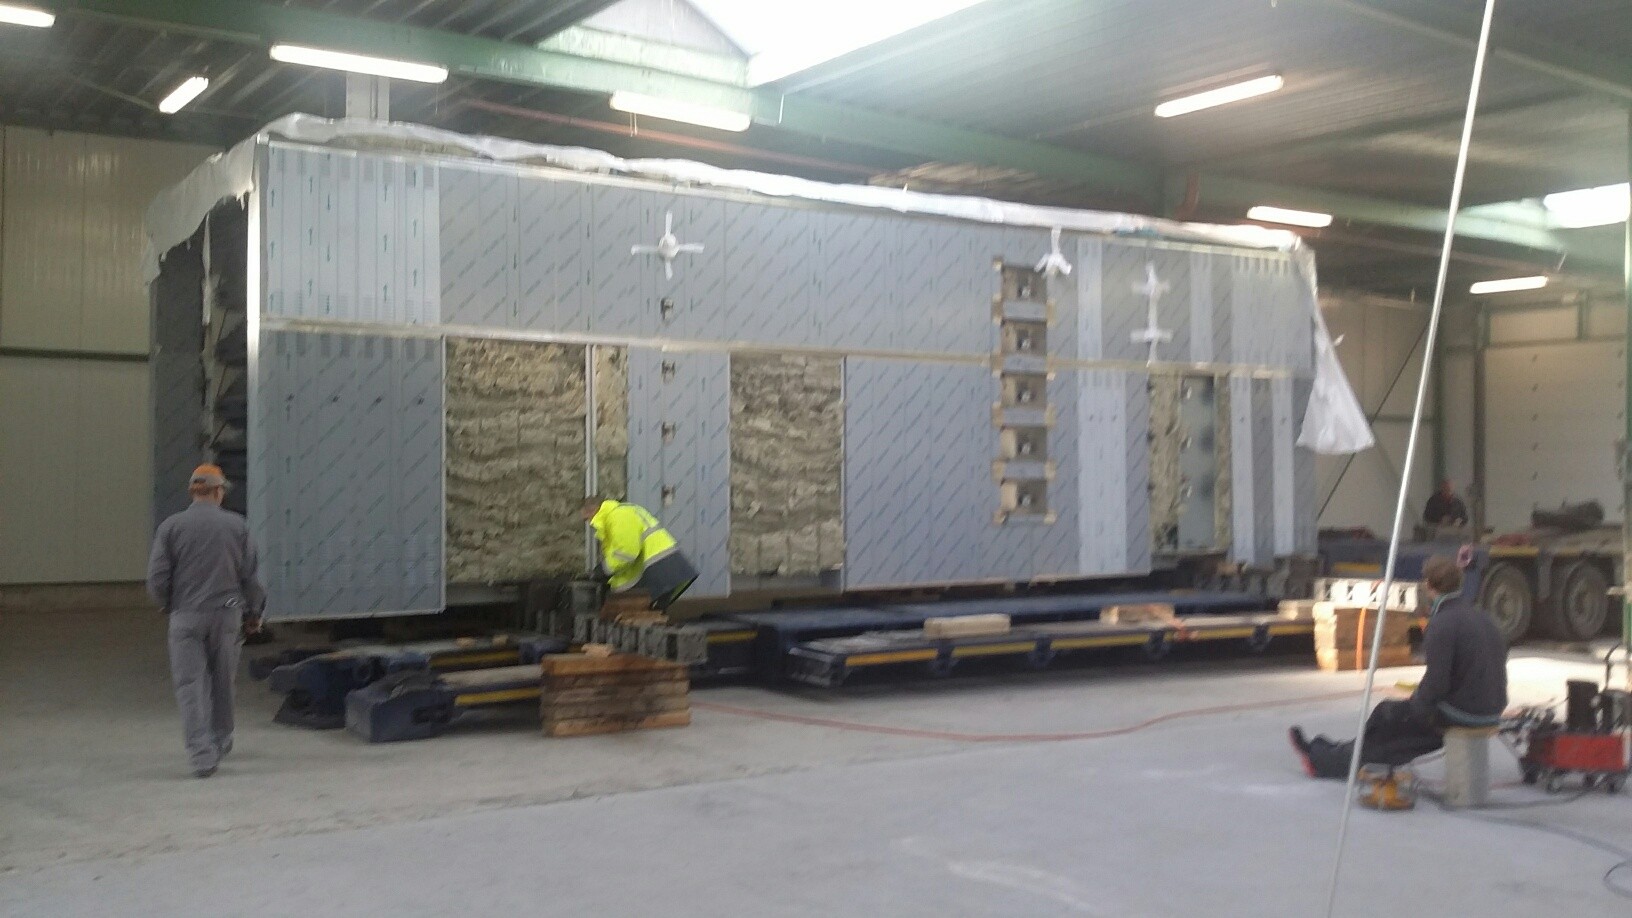 Intaking of Gostol thermo-oil oven into a bakery in Belgium